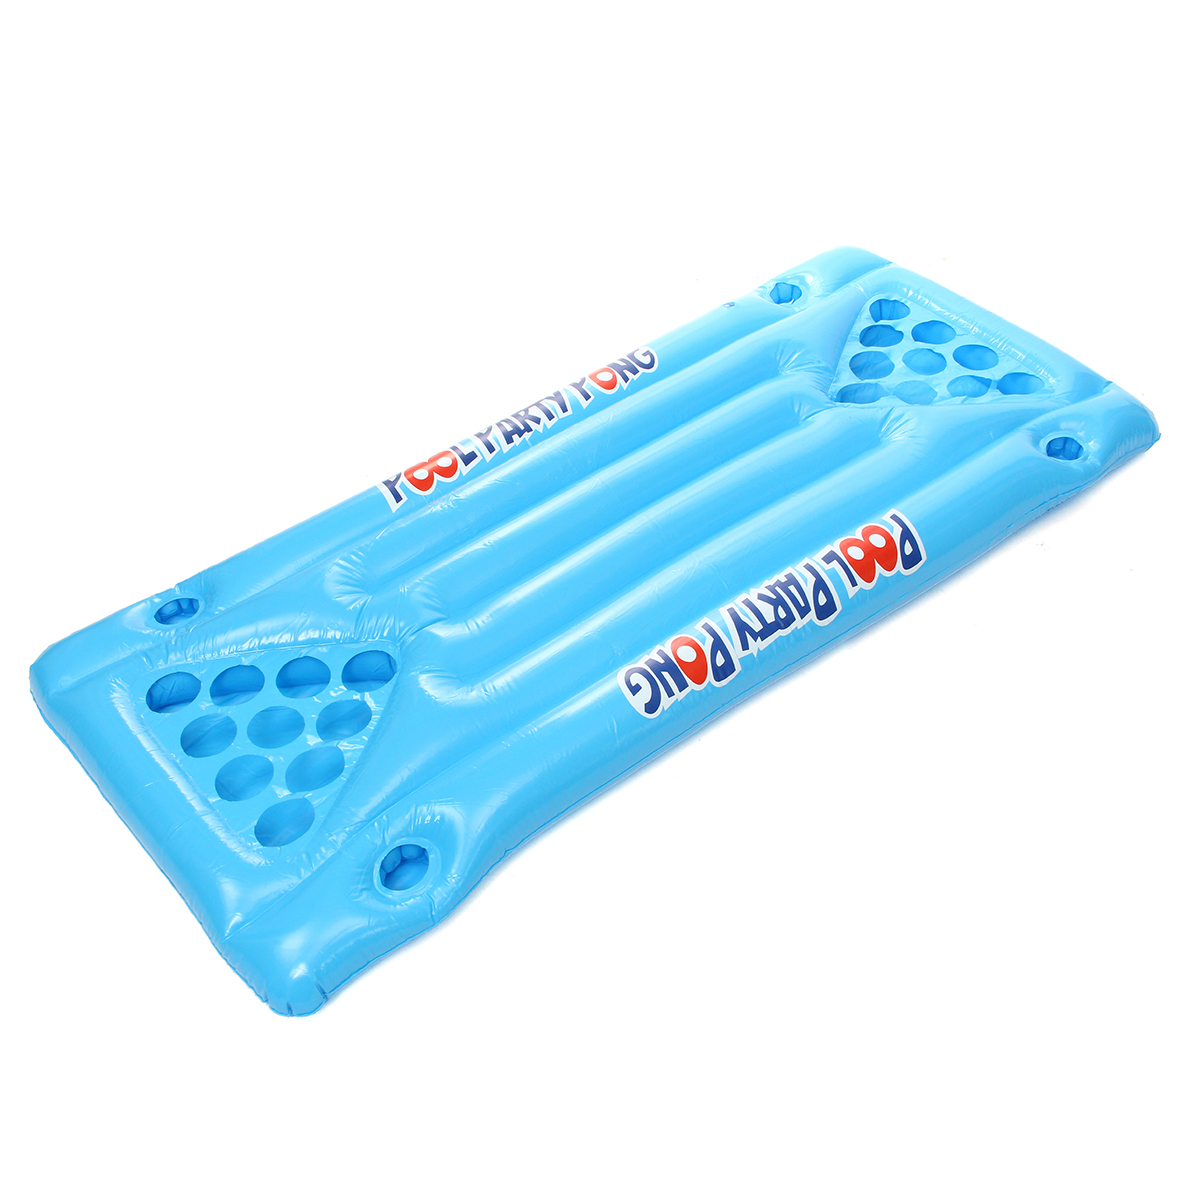 PVC-Inflatable-Beer-Pong-Ball-Table-Water-Floating-Raft-Lounge-Pool-Drinking-Game-24-Cups-Holder-1231572-5